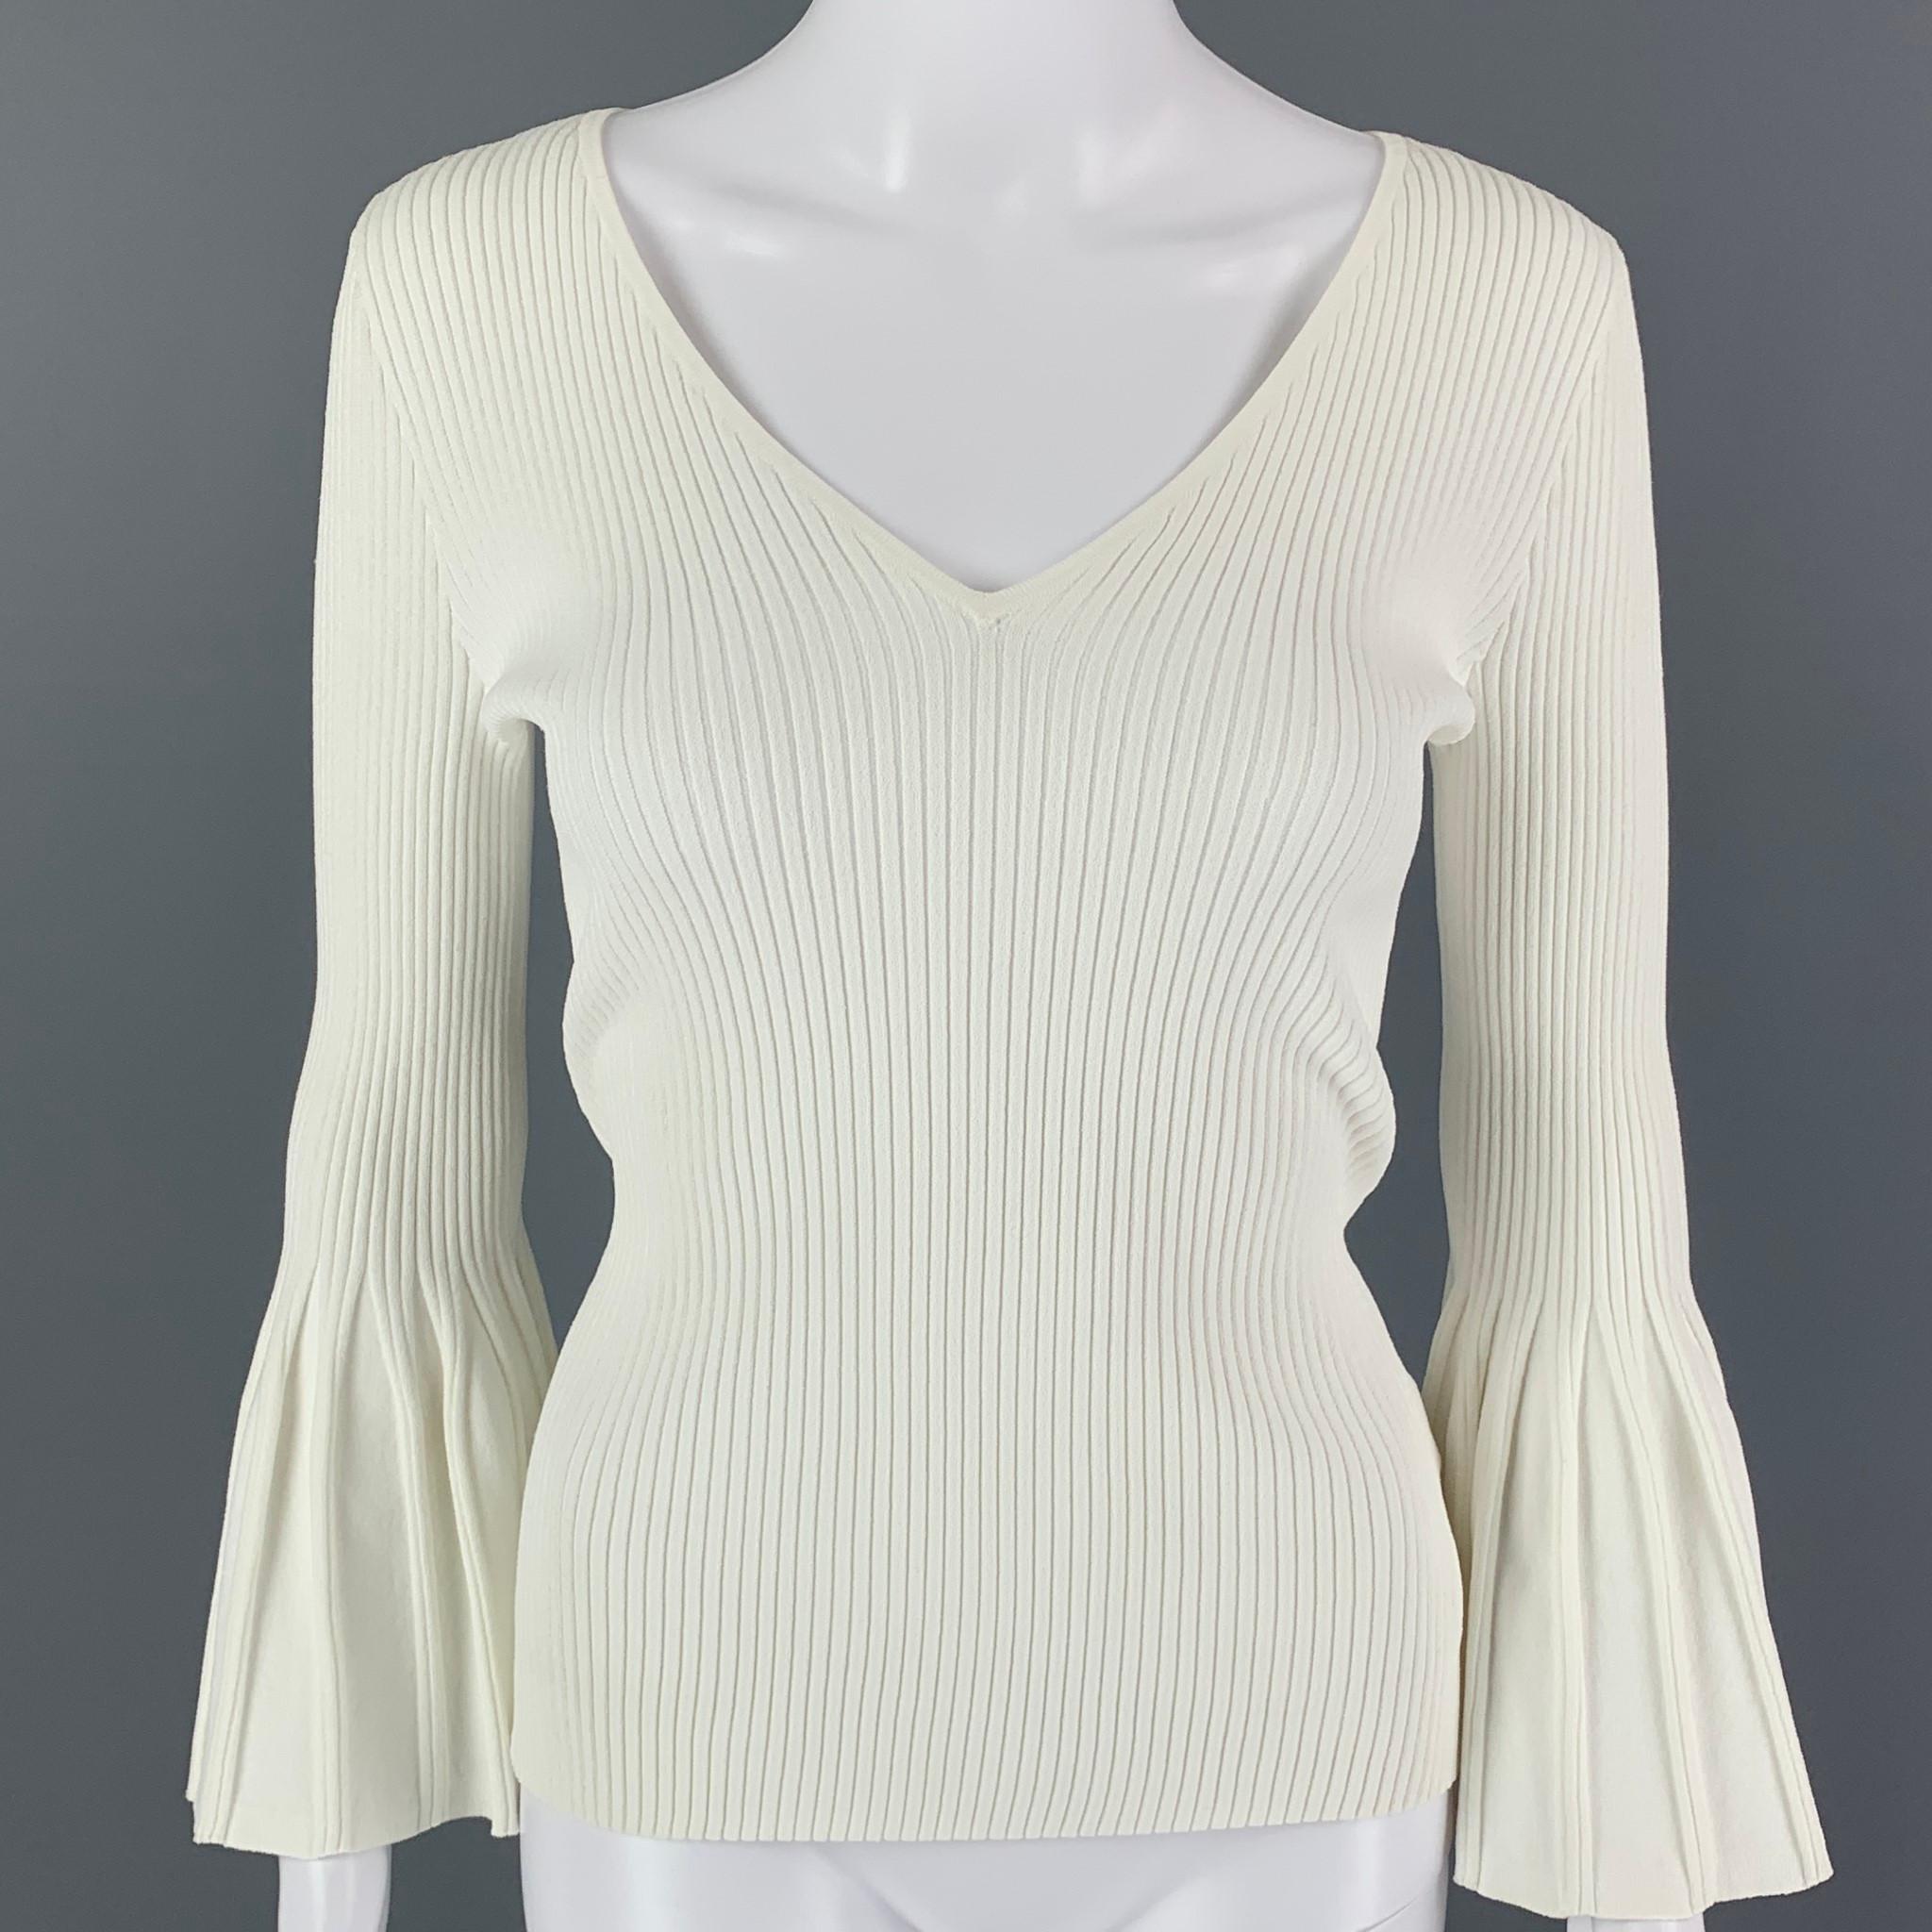 CAROLINA HERRERA top comes in a white stretch ribbed viscose / polyester featuring flared sleeves and a v-neck. 

Very Good Pre-Owned Condition.
Marked: M/M

Measurements:

Shoulder: 15 in.
Bust: 26 in.
Sleeve: 21 in.
Length: 23 in.

SKU: